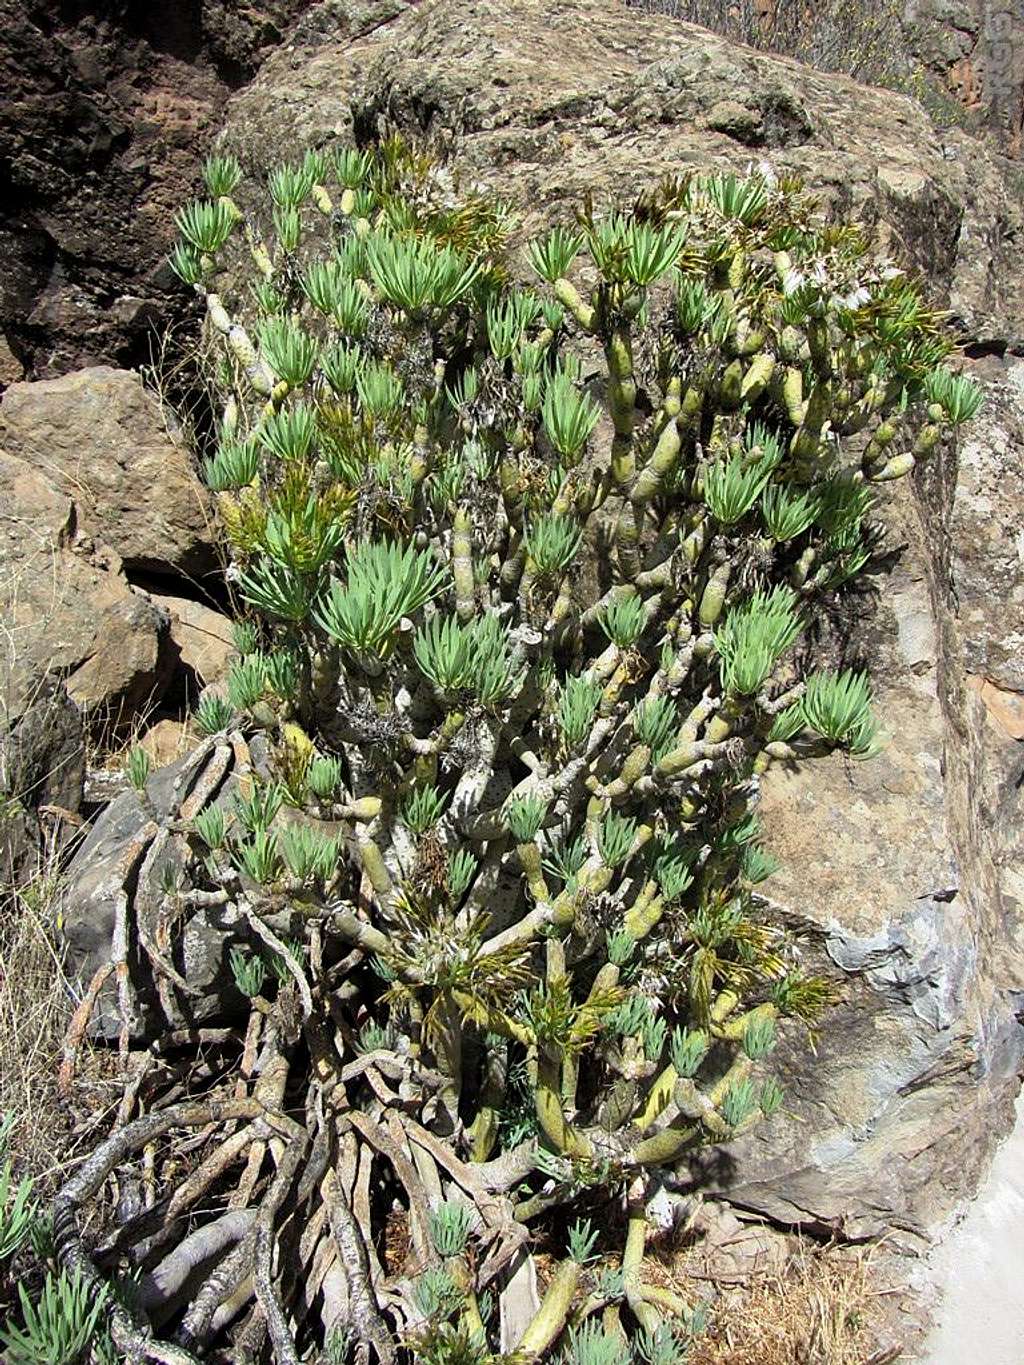 A typical Canarian plant along the approach to Via Ferrata Baviera